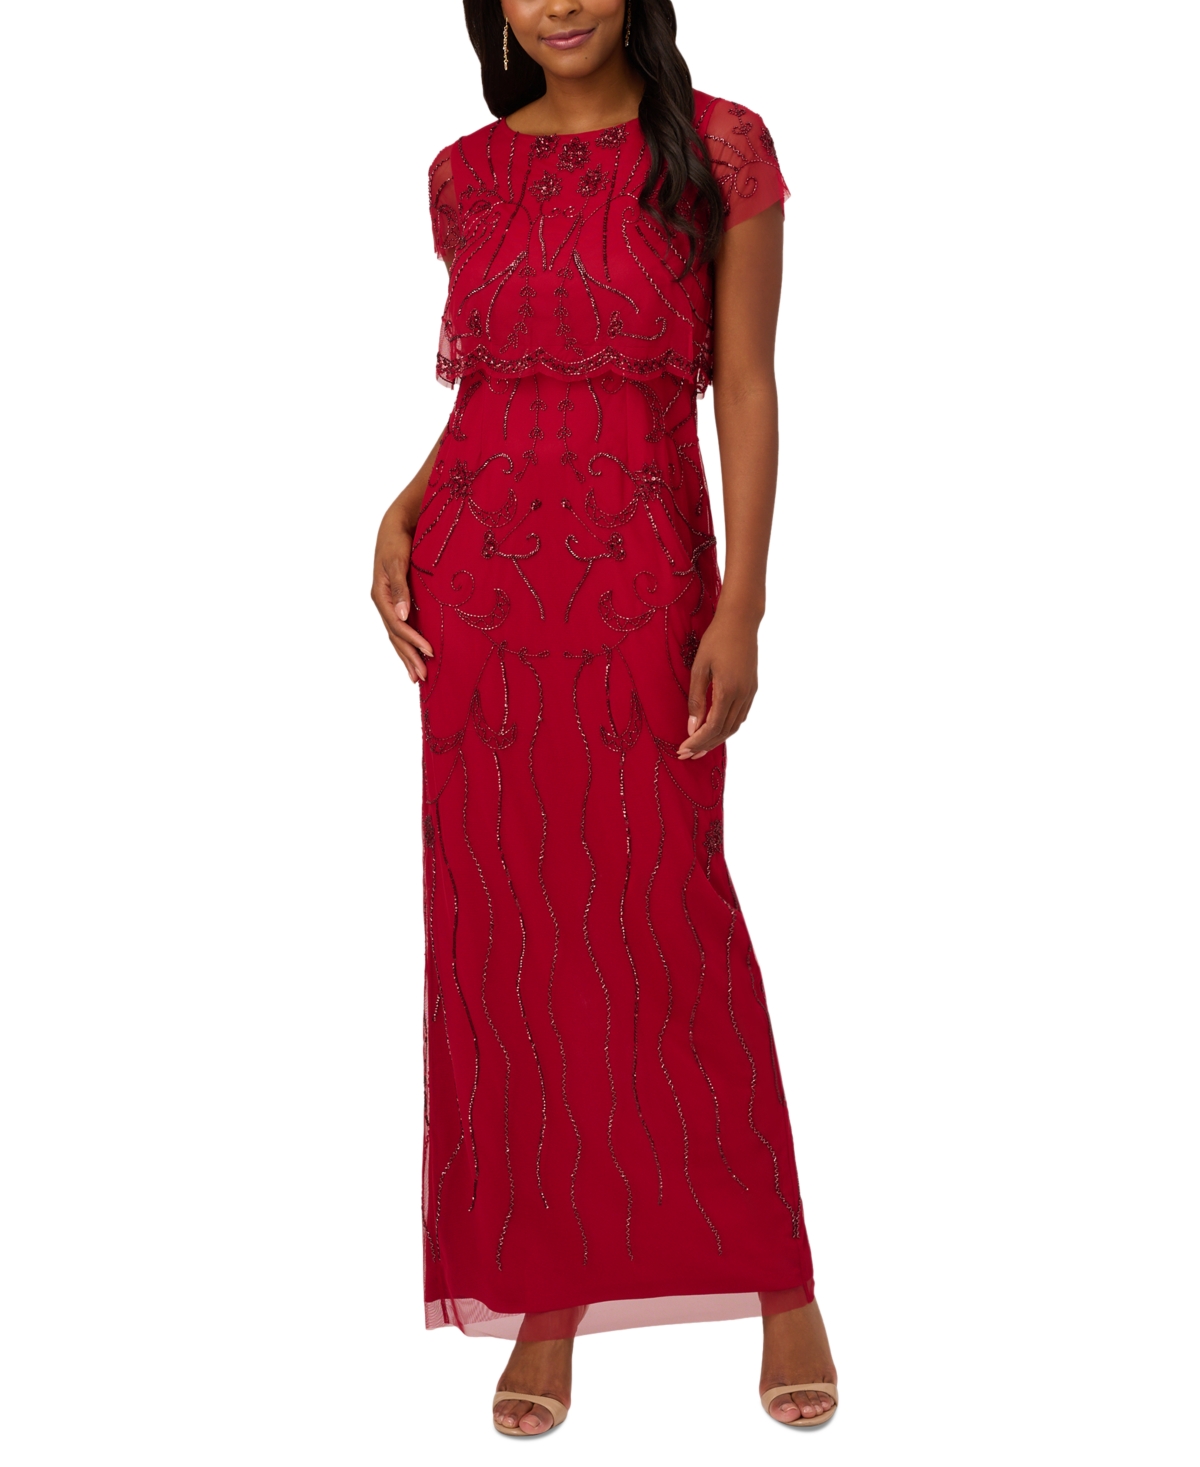 Downton Abbey Inspired Dresses Adrianna Papell Petite Beaded Scalloped-Popover Gown - Cranberry $229.00 AT vintagedancer.com